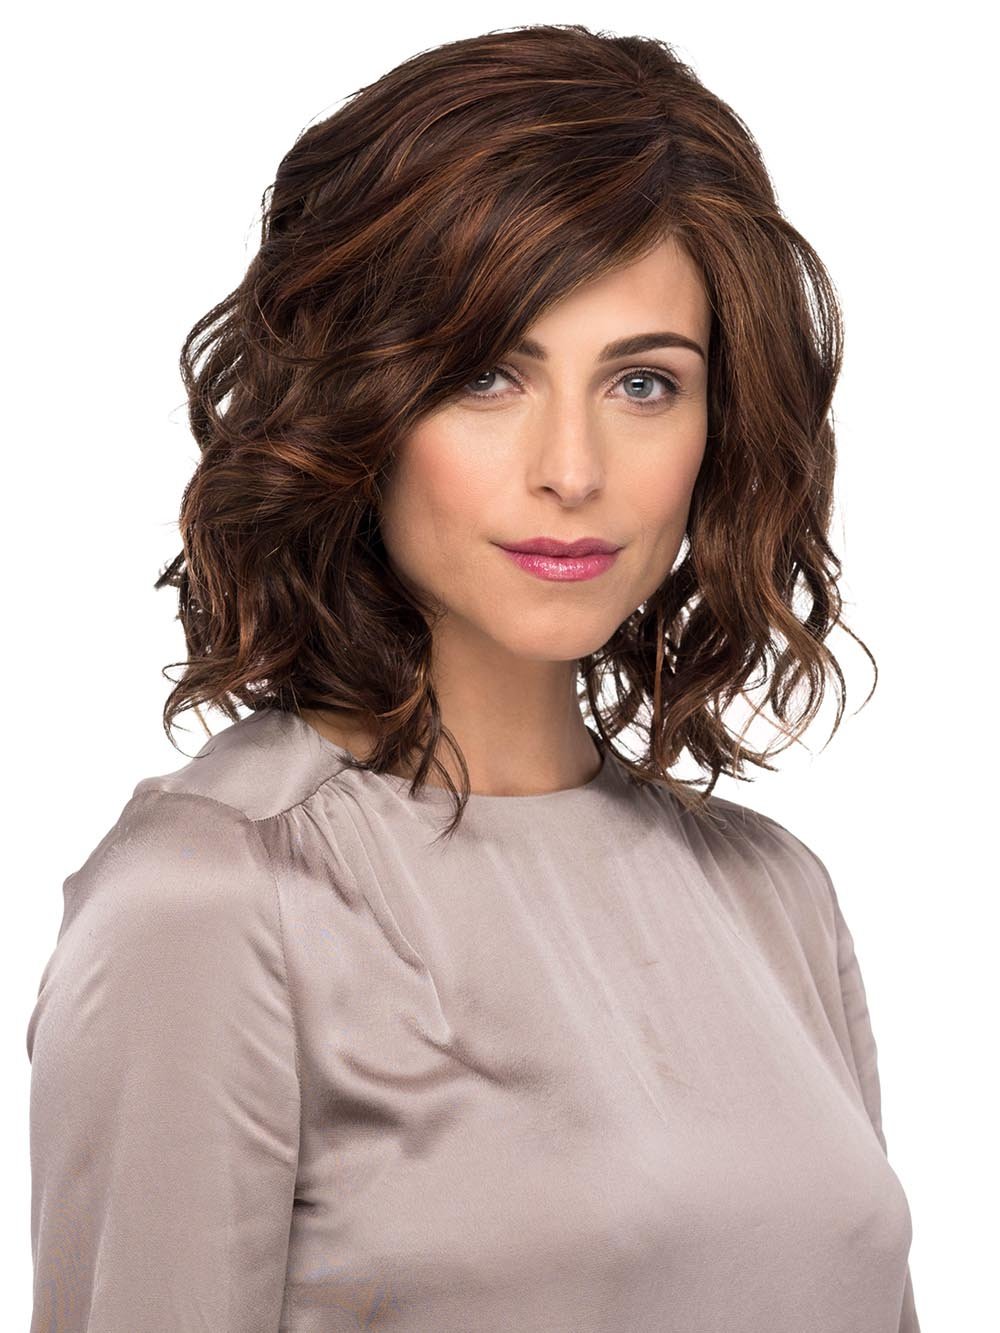 A loose, wavy, mid-length bob that looks and feels wonderfully natural